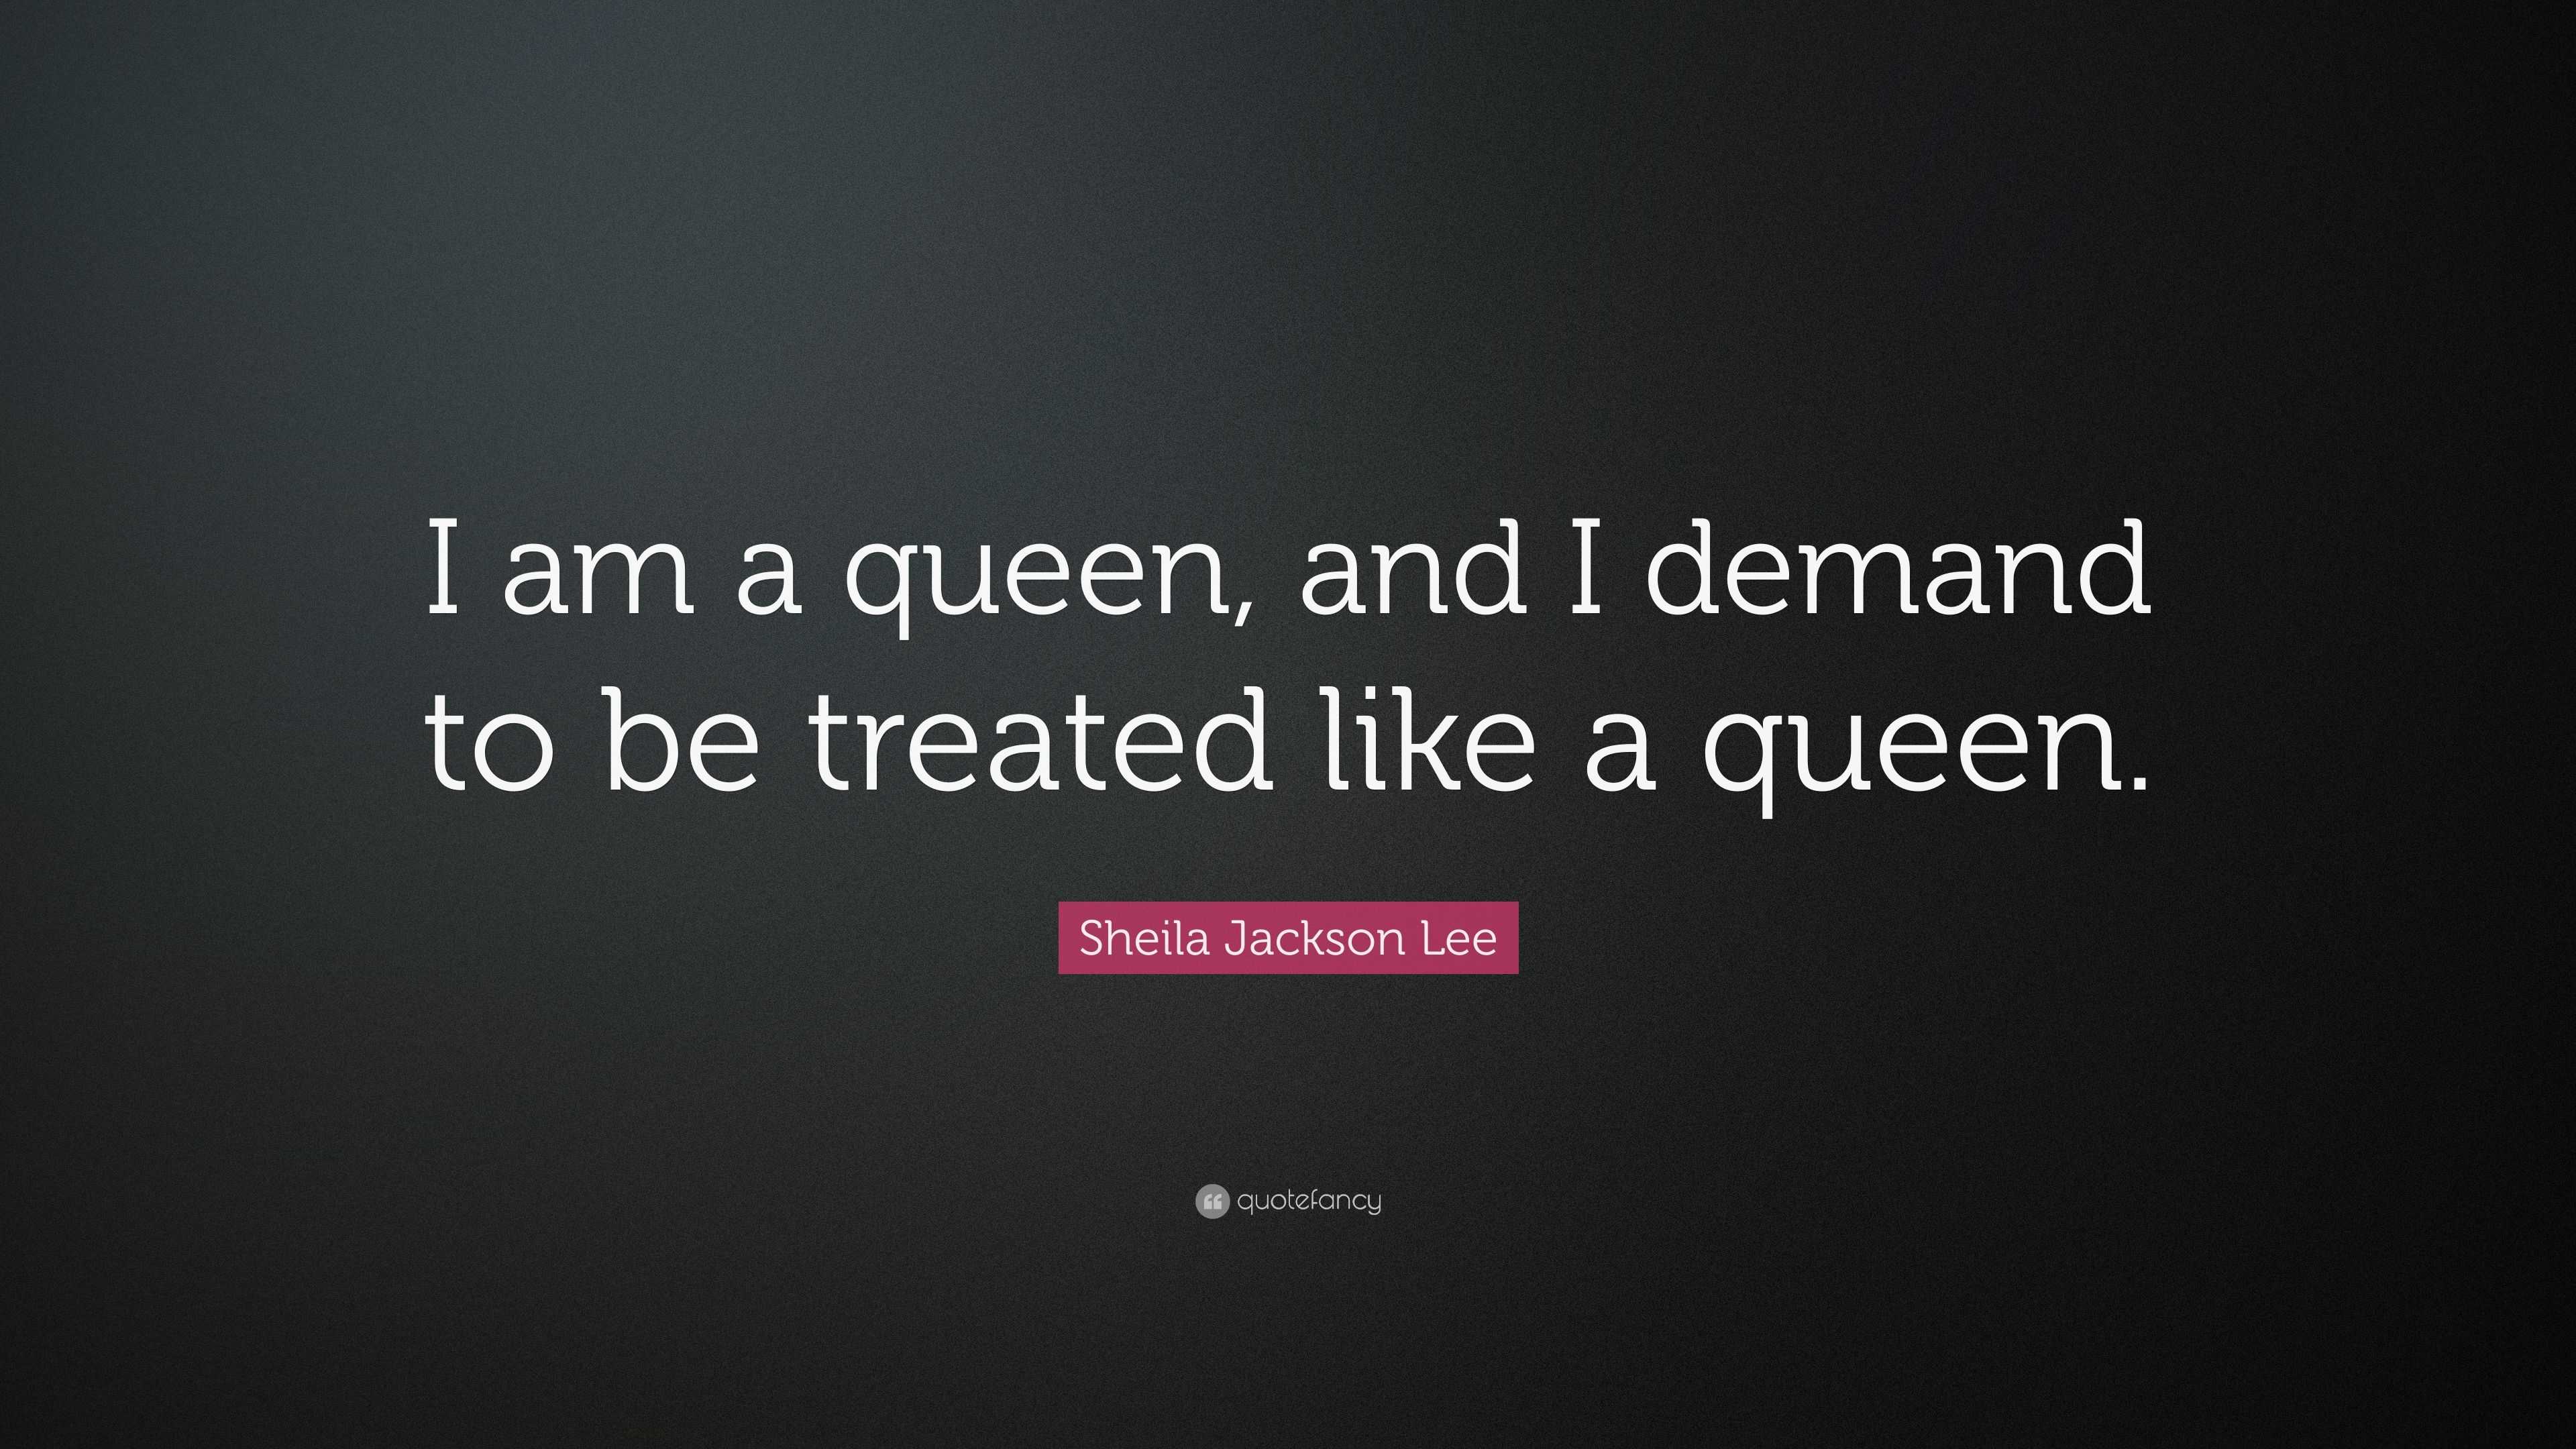 Sheila Jackson Lee Quote: “I am a queen, and I demand to be treated ...